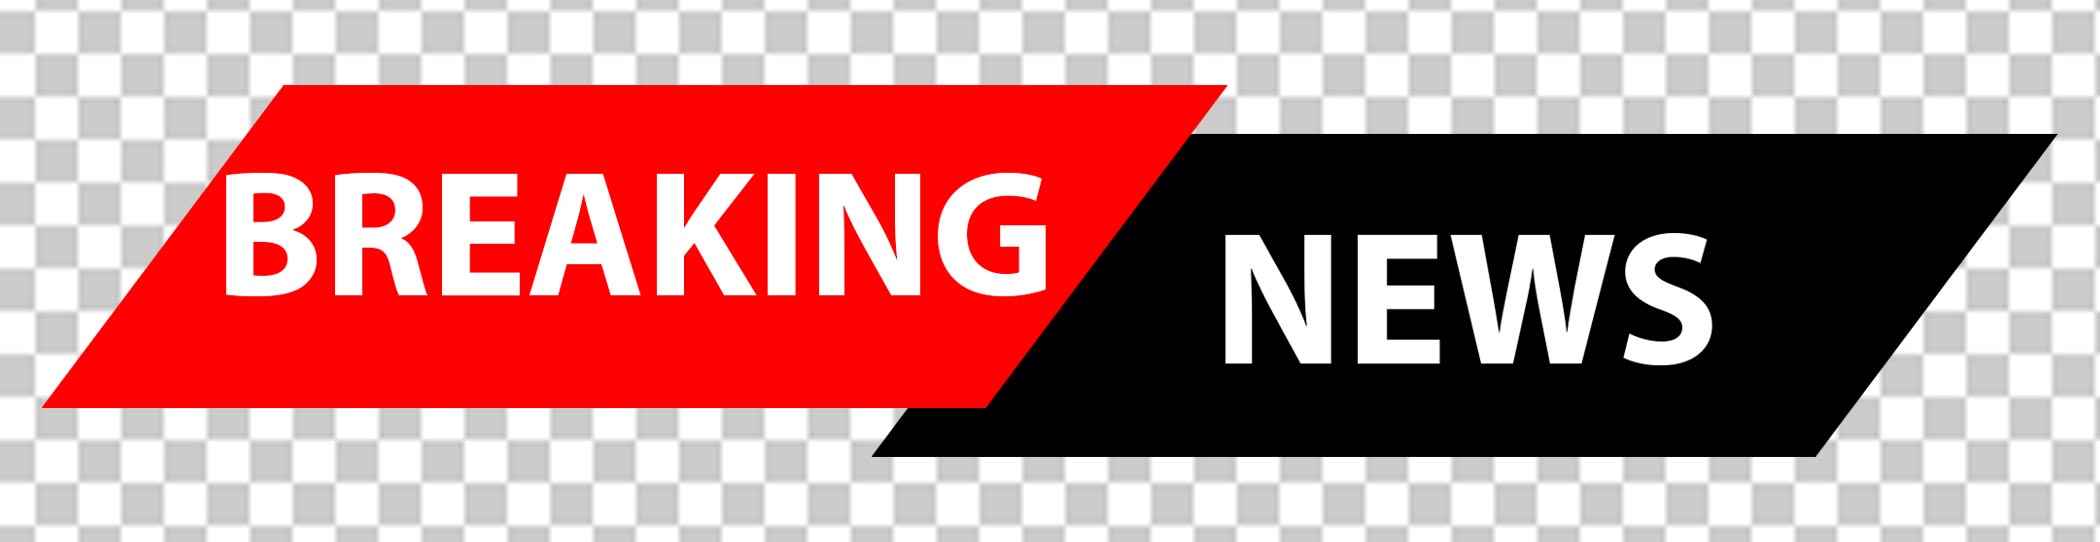 Breaking News Png Template Free High Quility Image Download The Mayanagari